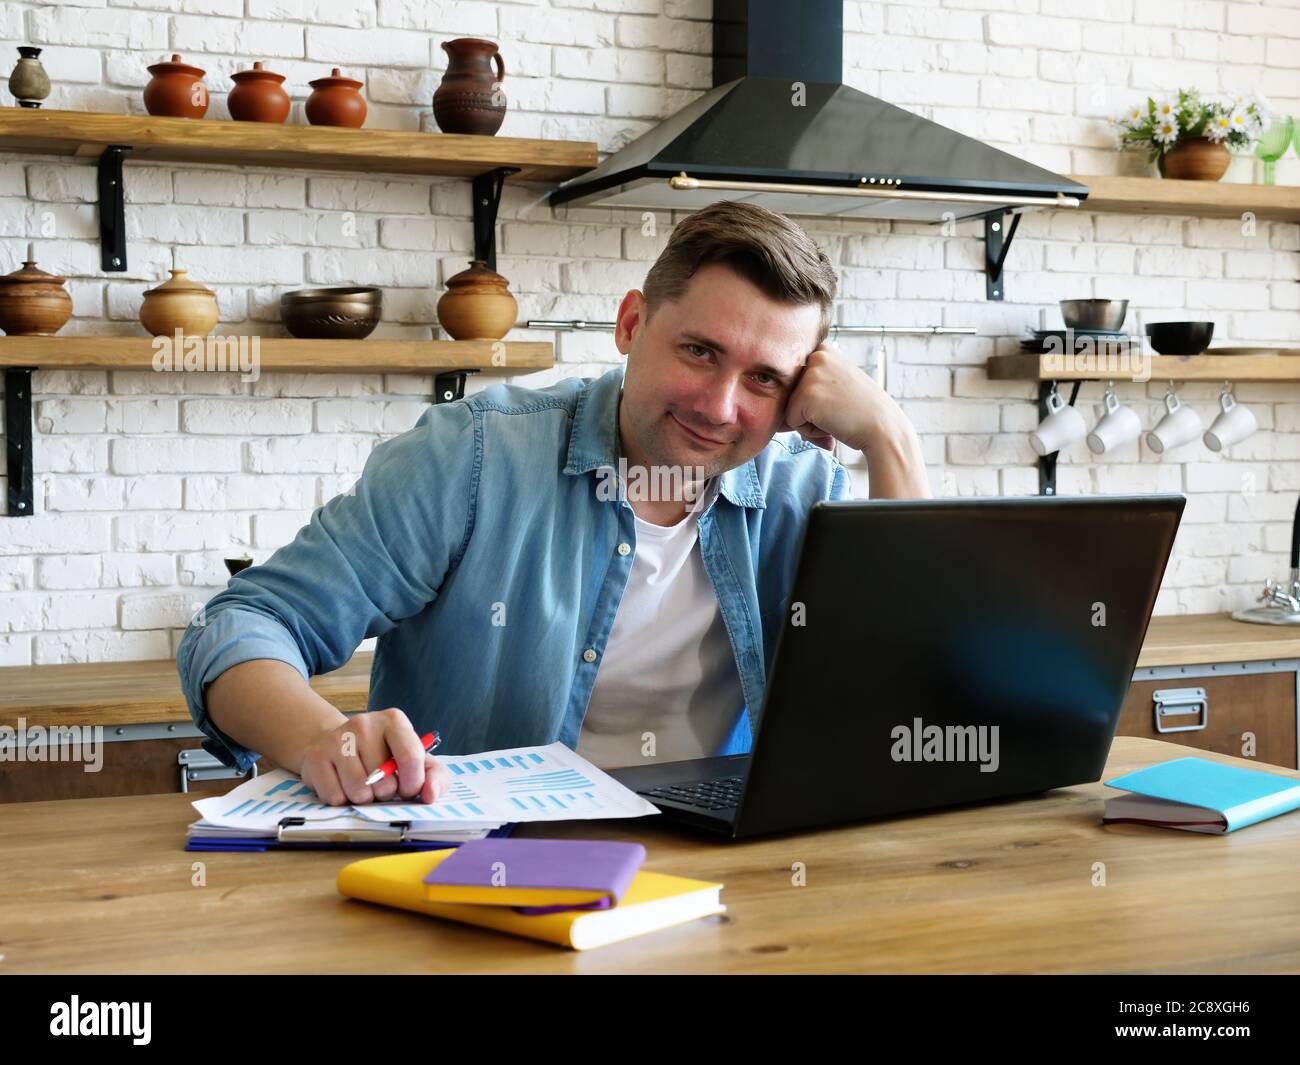 Freelancer works remotely from home. A man with a laptop in the kitchen. Stock Photo